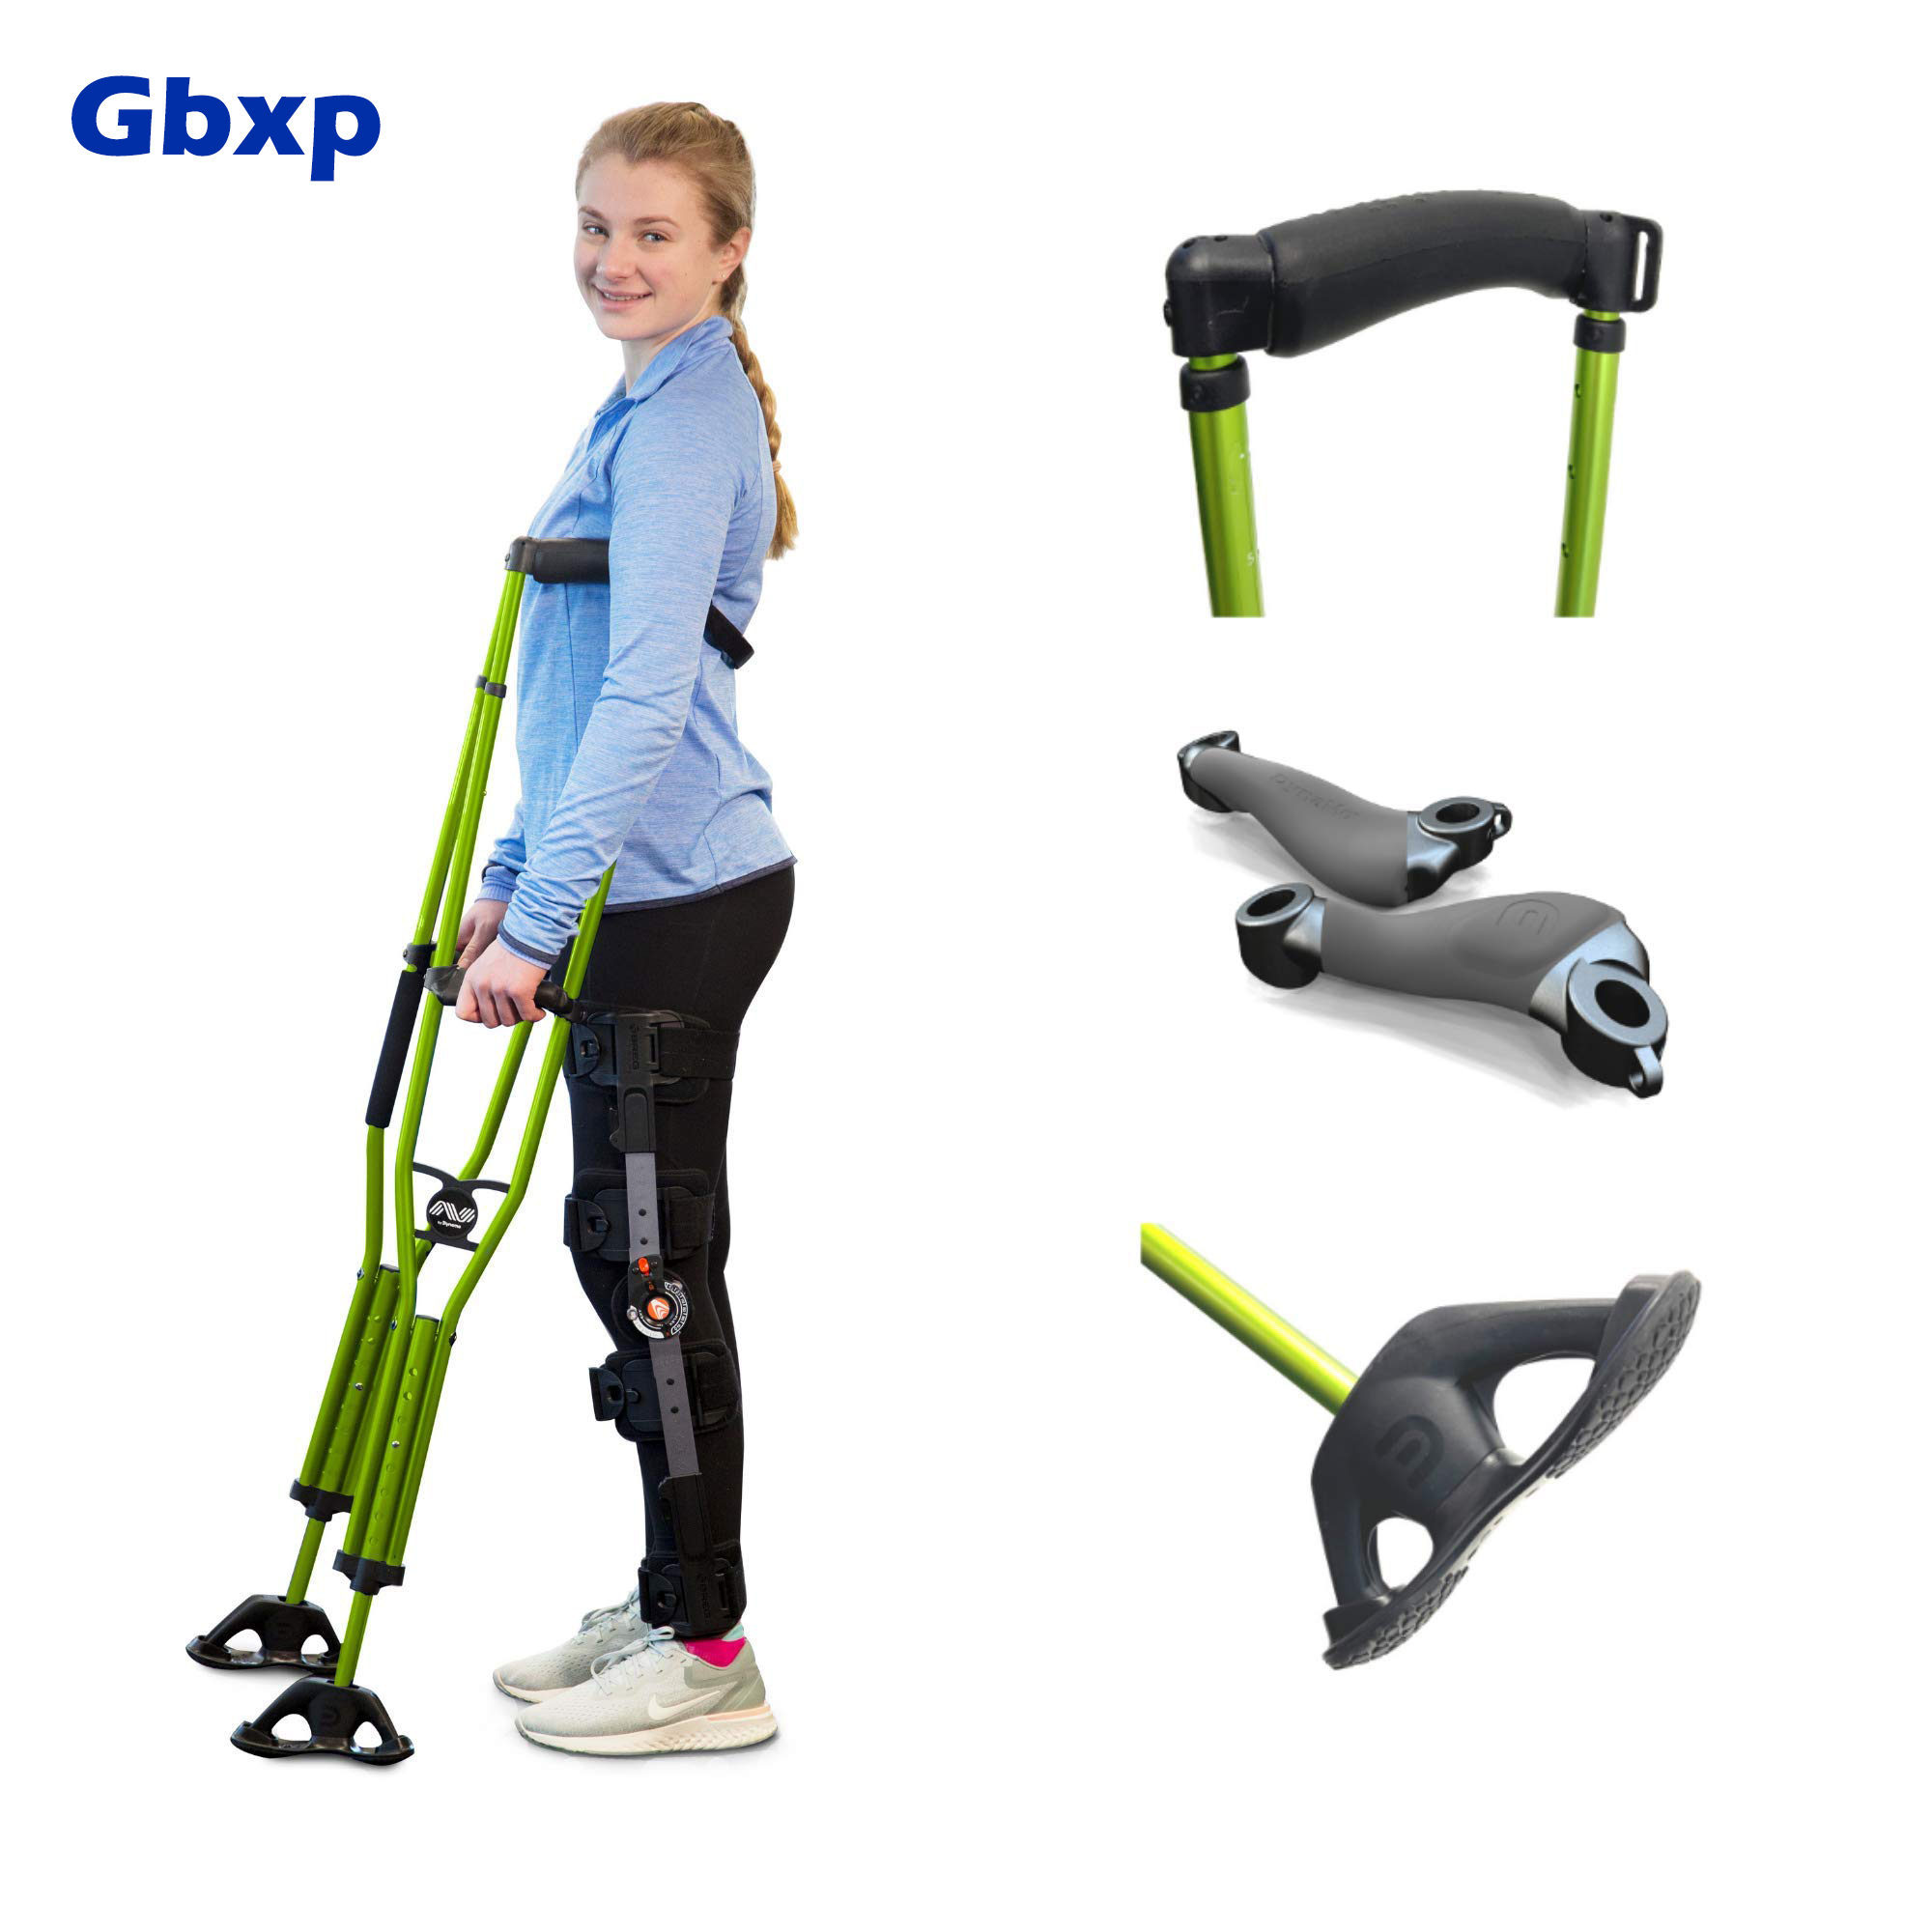 Gbxp Sport Swings Lightweight Crutches Are The Best For Recovery. Big Shock-Resistant Grippy Feet Give You Confidence & Comfort. Anti-slip Back Strap Reduces Slip-outs/Falling (4’6″-5’2″)